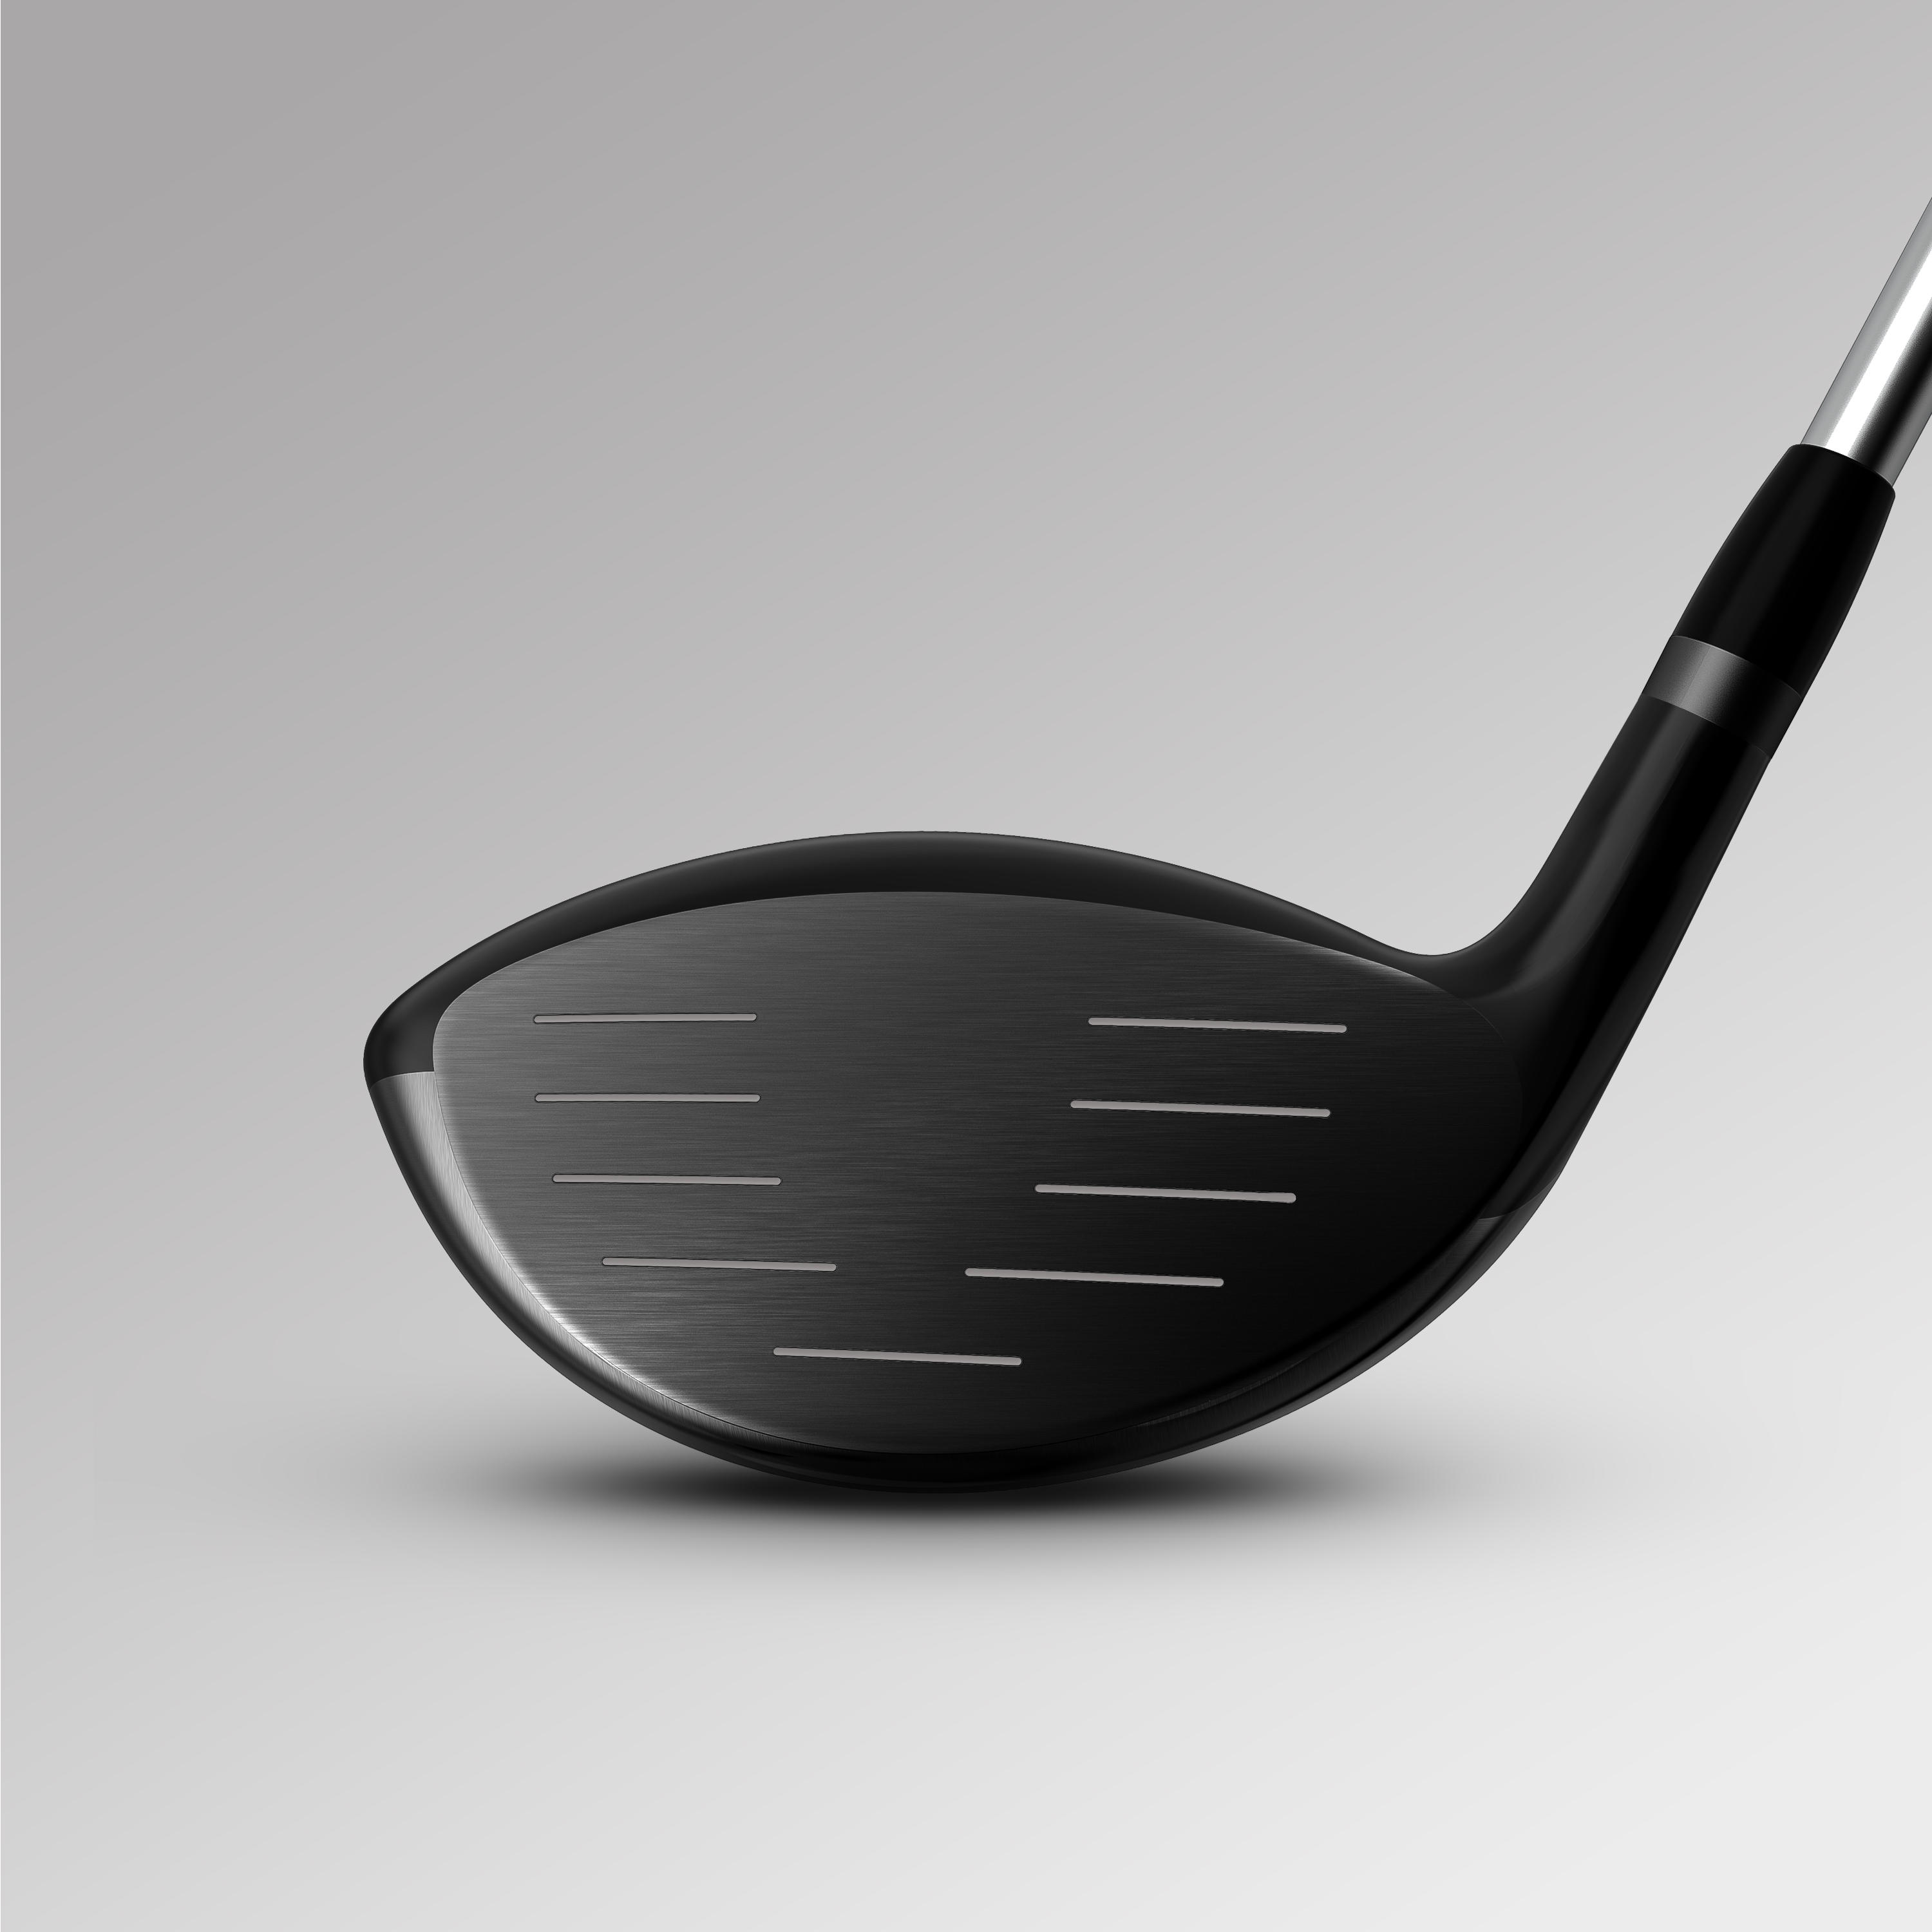 Golf driver right-handed size 2 high speed - INESIS 500 3/8